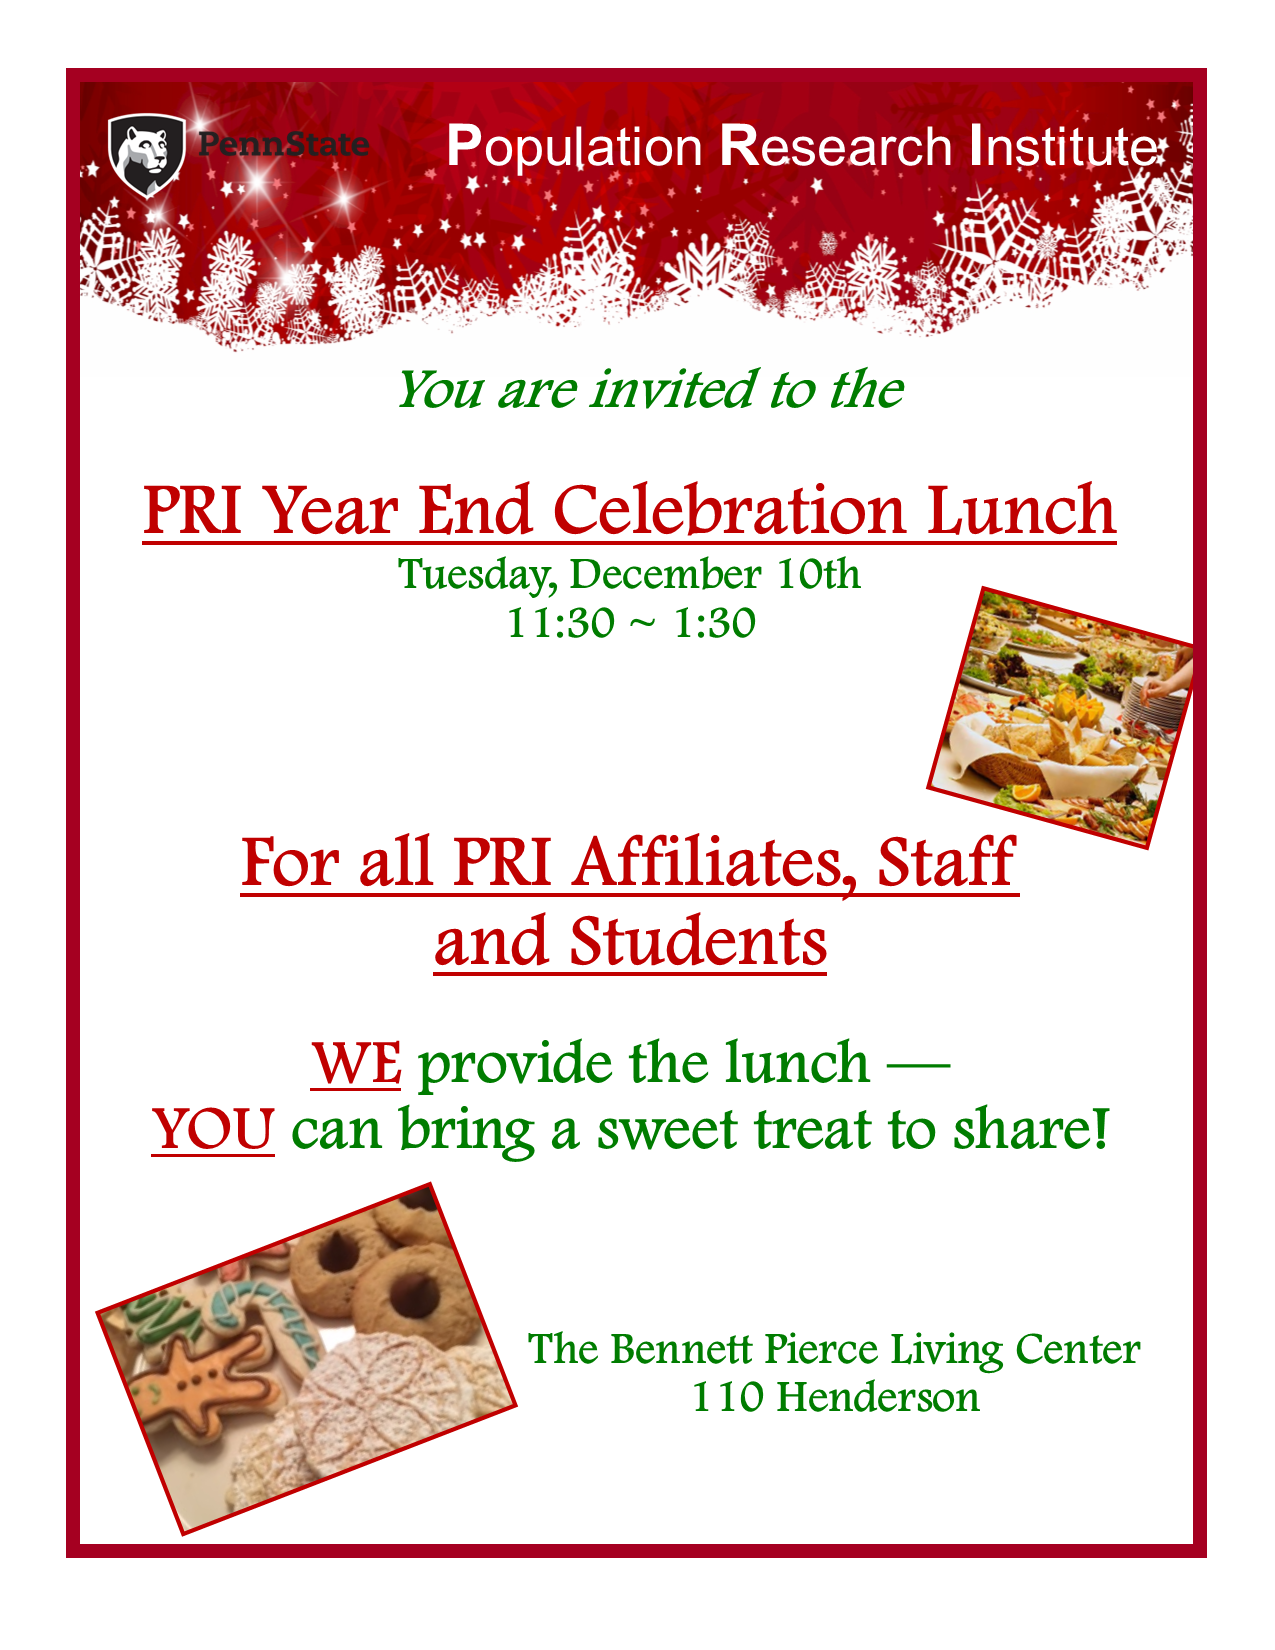 Photo of the flyer with all of the details, photo of several assortments of banquet foods on a table, and photo of holiday cookies.